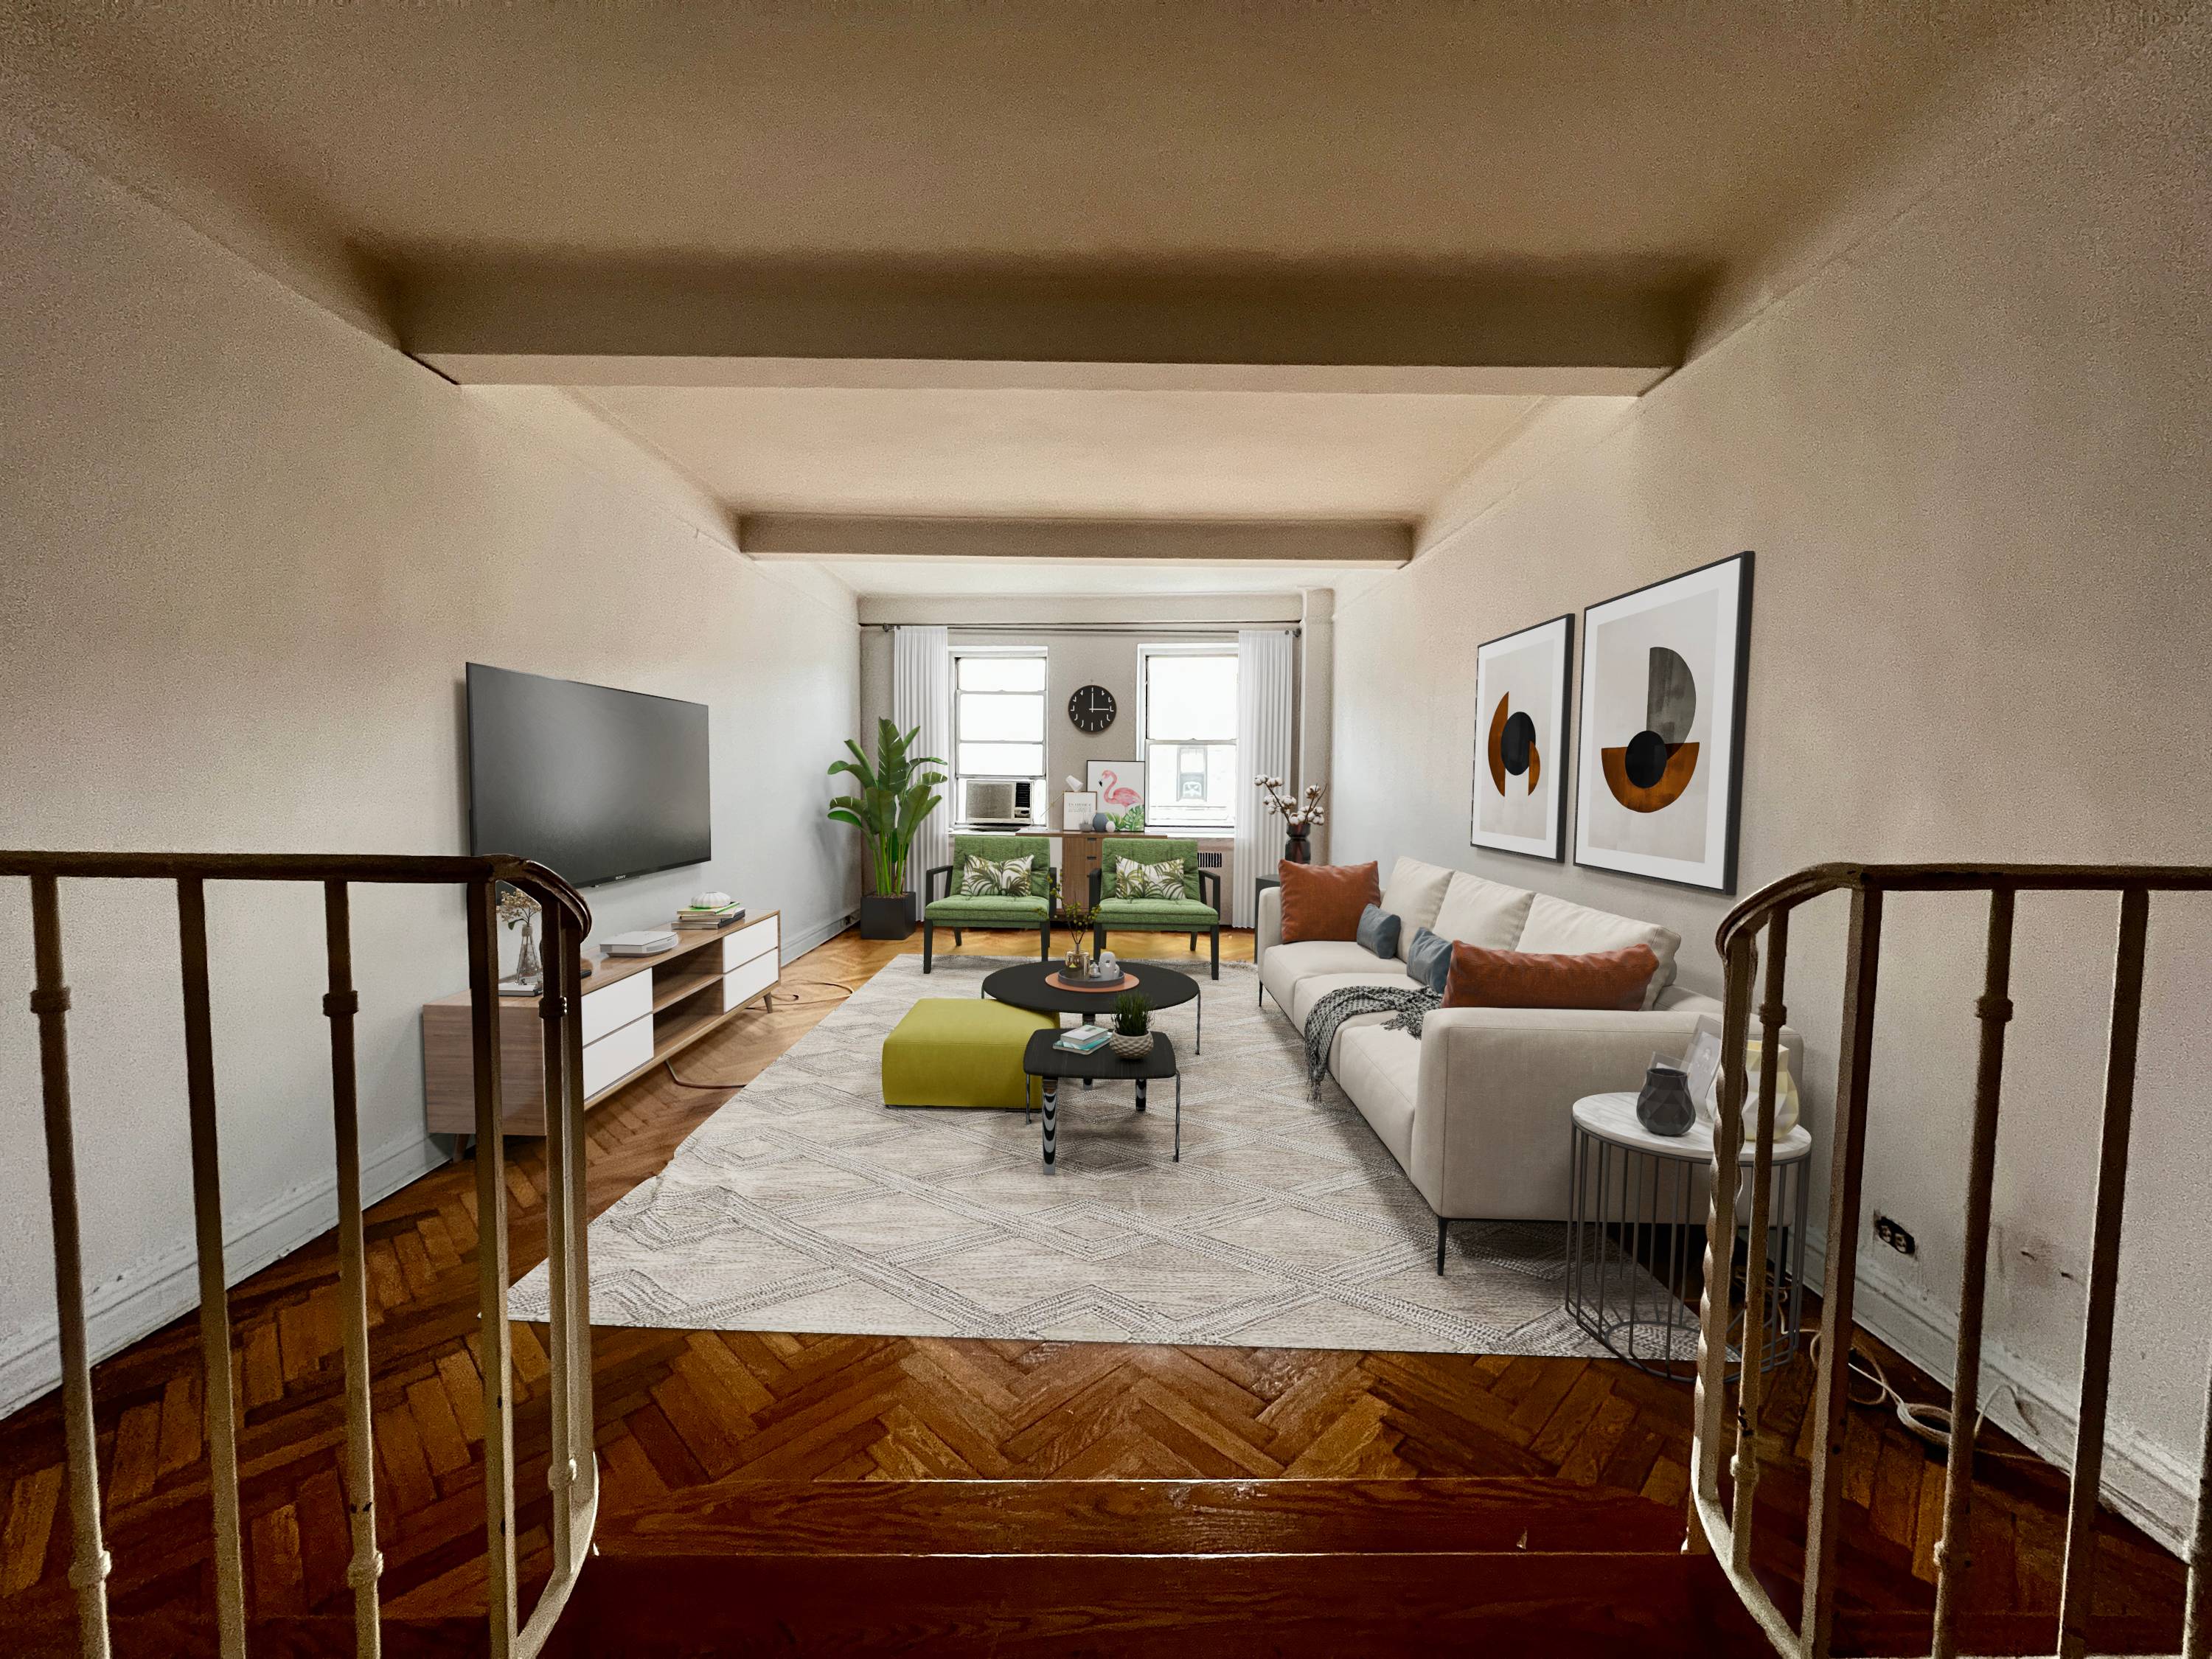 The stunning 2 bedroom, 2 bathroom apartment is filled with natural sunlight and featuring herringbone hardwood floors, beamed ceilings, and sunken living room.